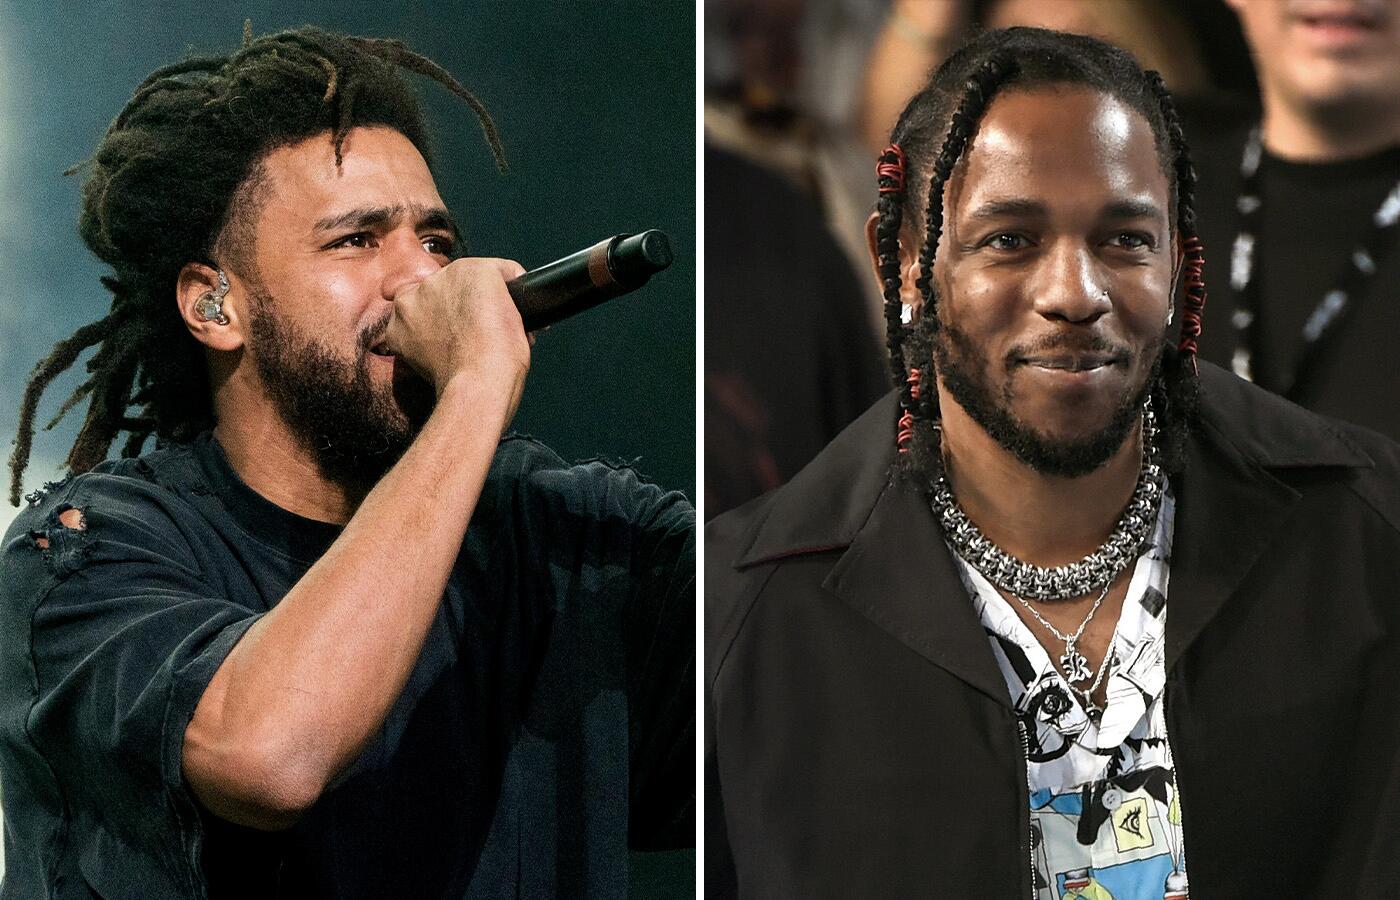 J. Cole repays Kendrick Lamar's shade with diss on new 'Might Delete Later' album